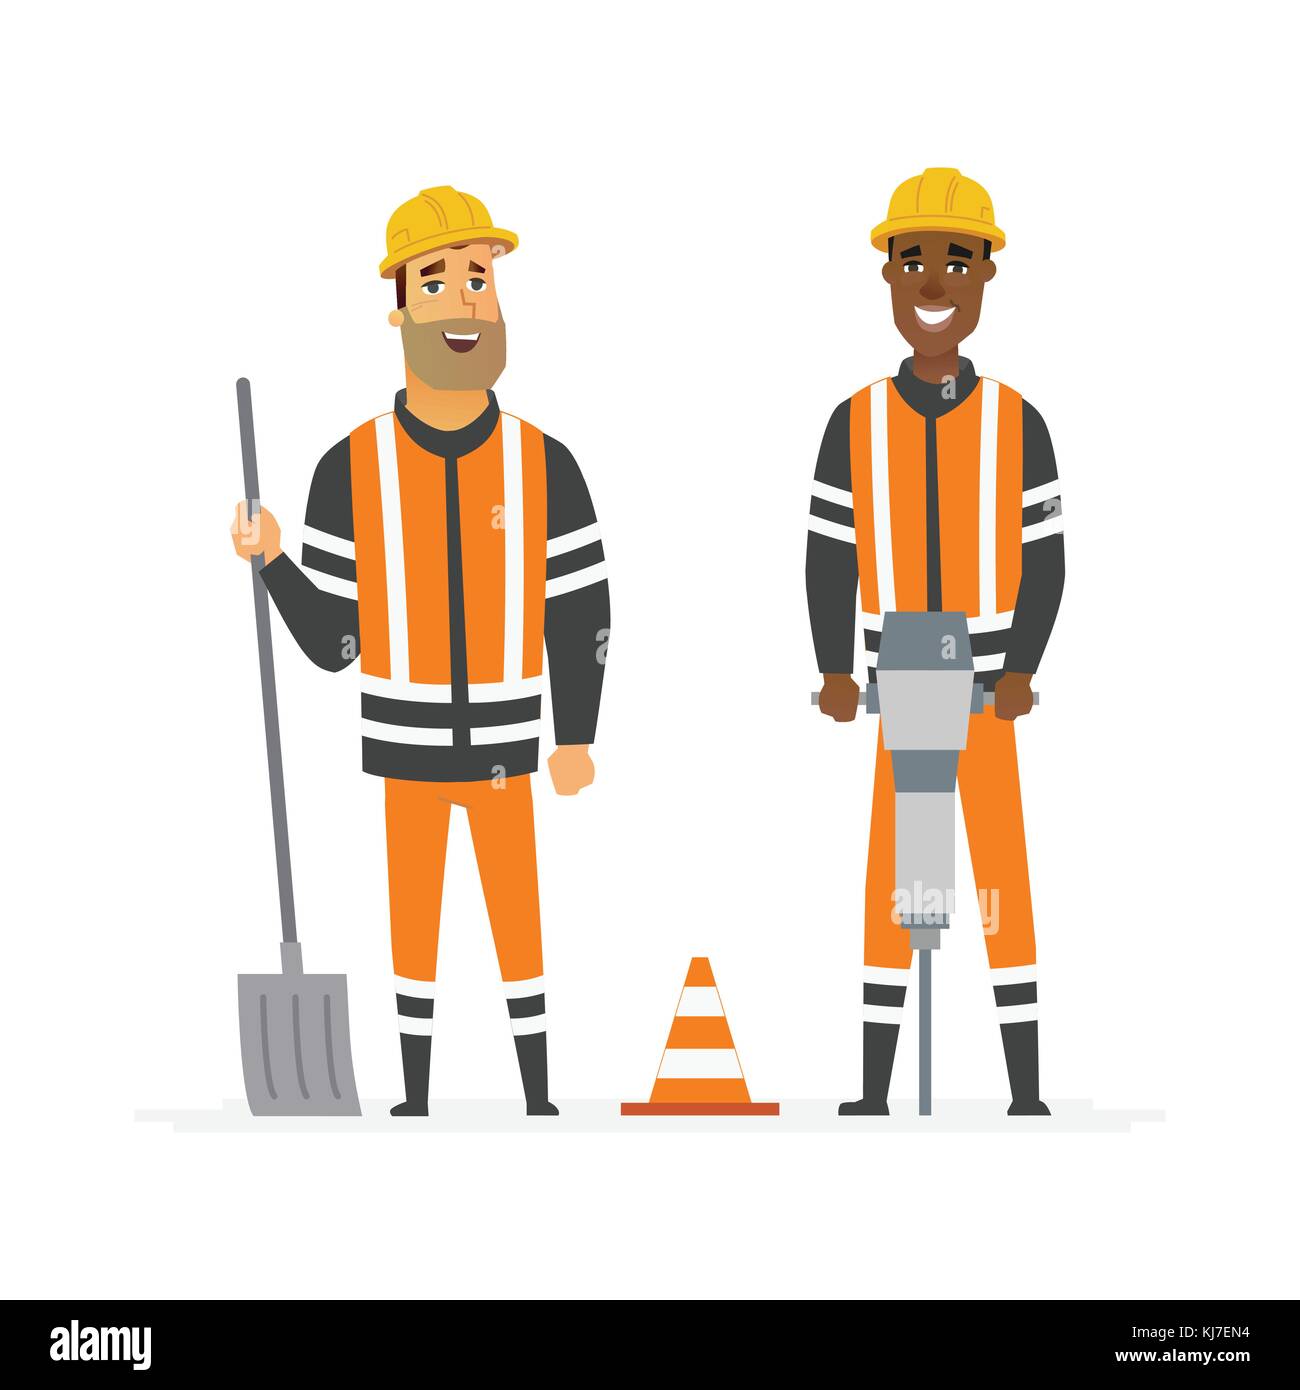 Road construction workers - cartoon people characters illustration